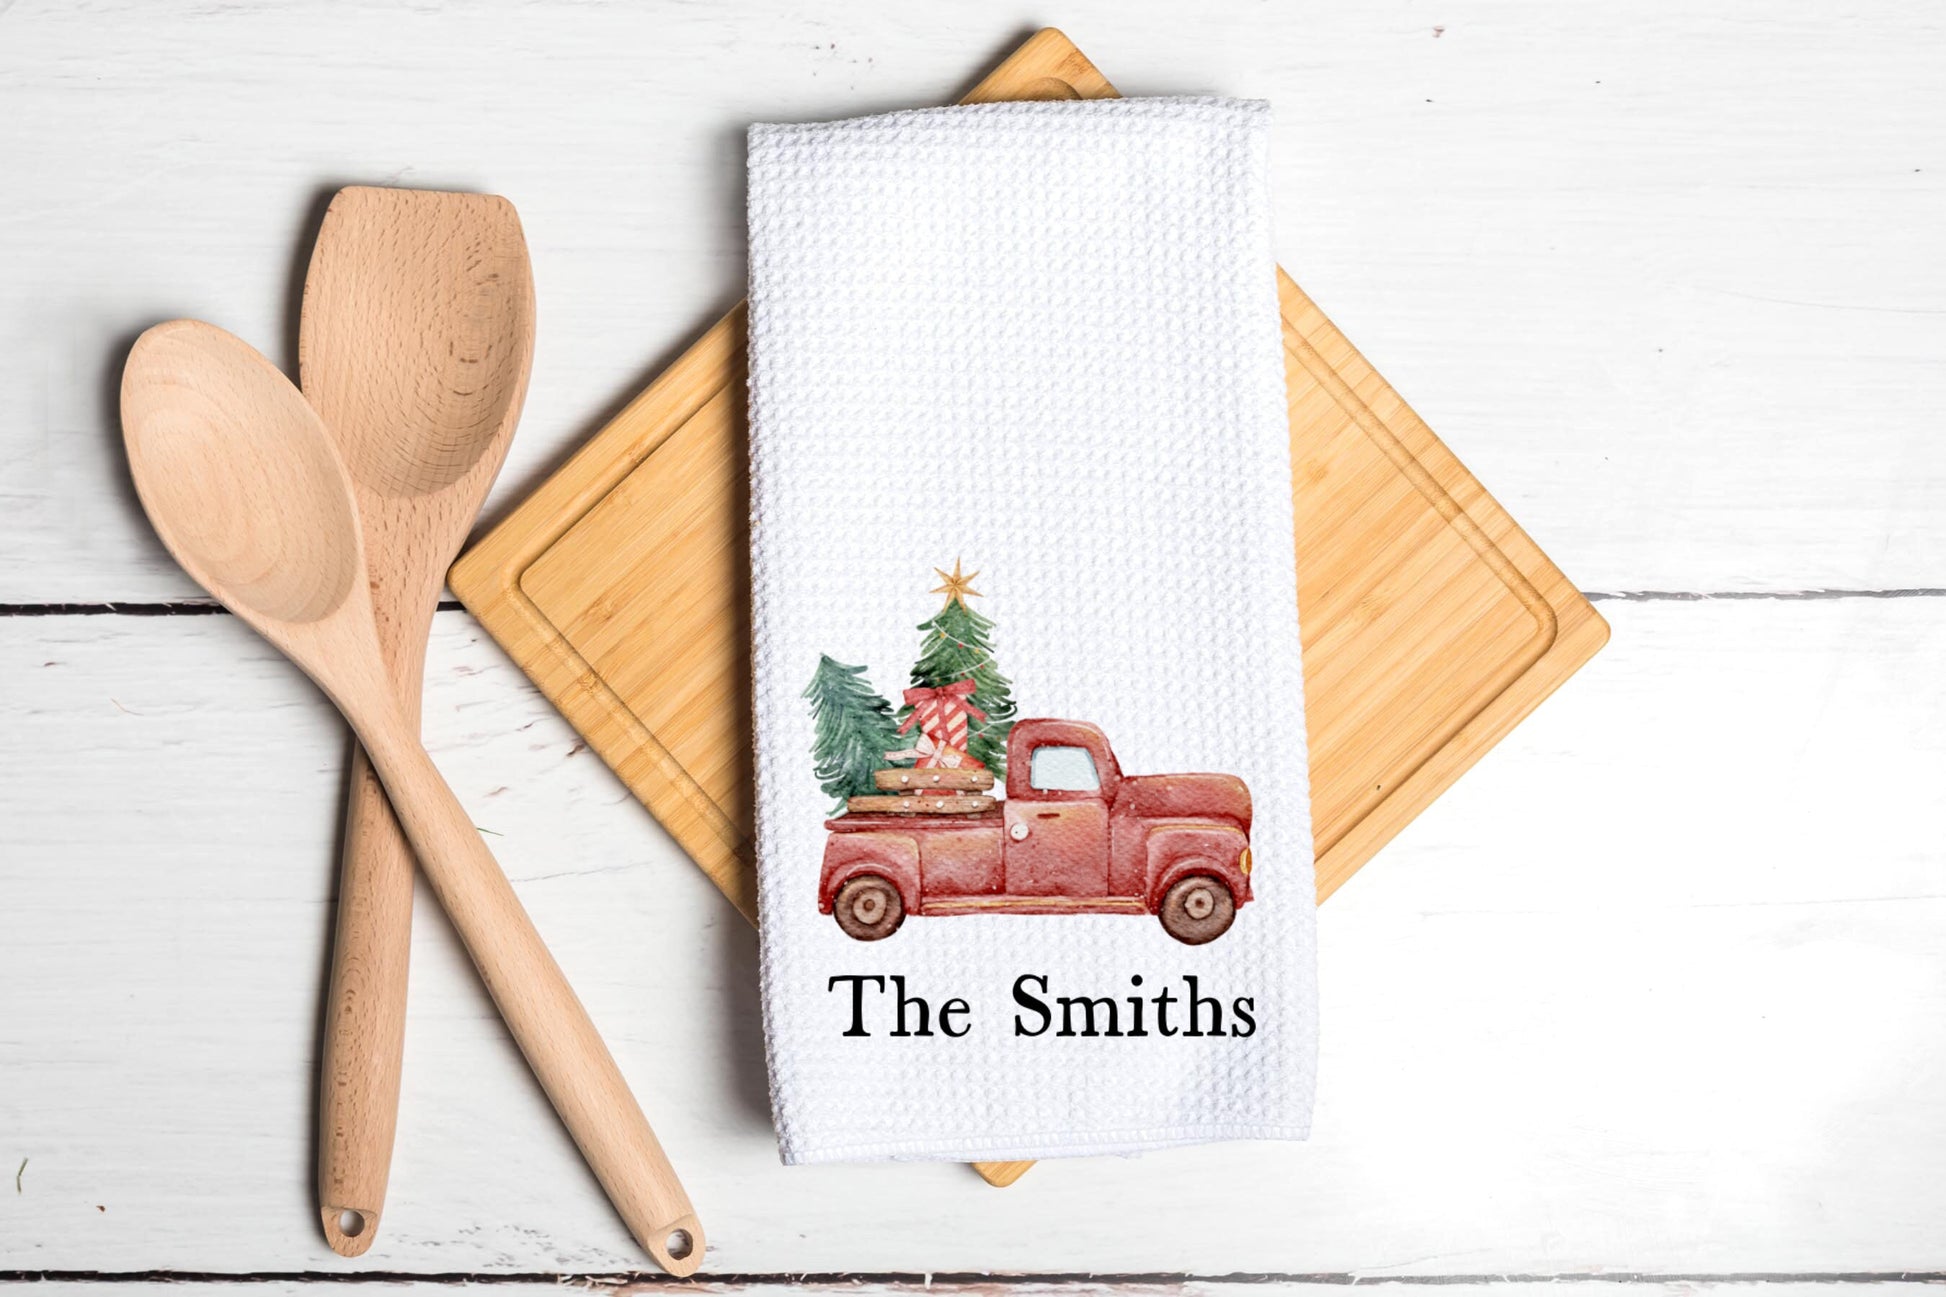 Christmas Old Truck Personalized Tea Dish Towel - Name Tea Towel Kitchen Décor - New Home Gift, Housewarming Farm Decorations house Towel